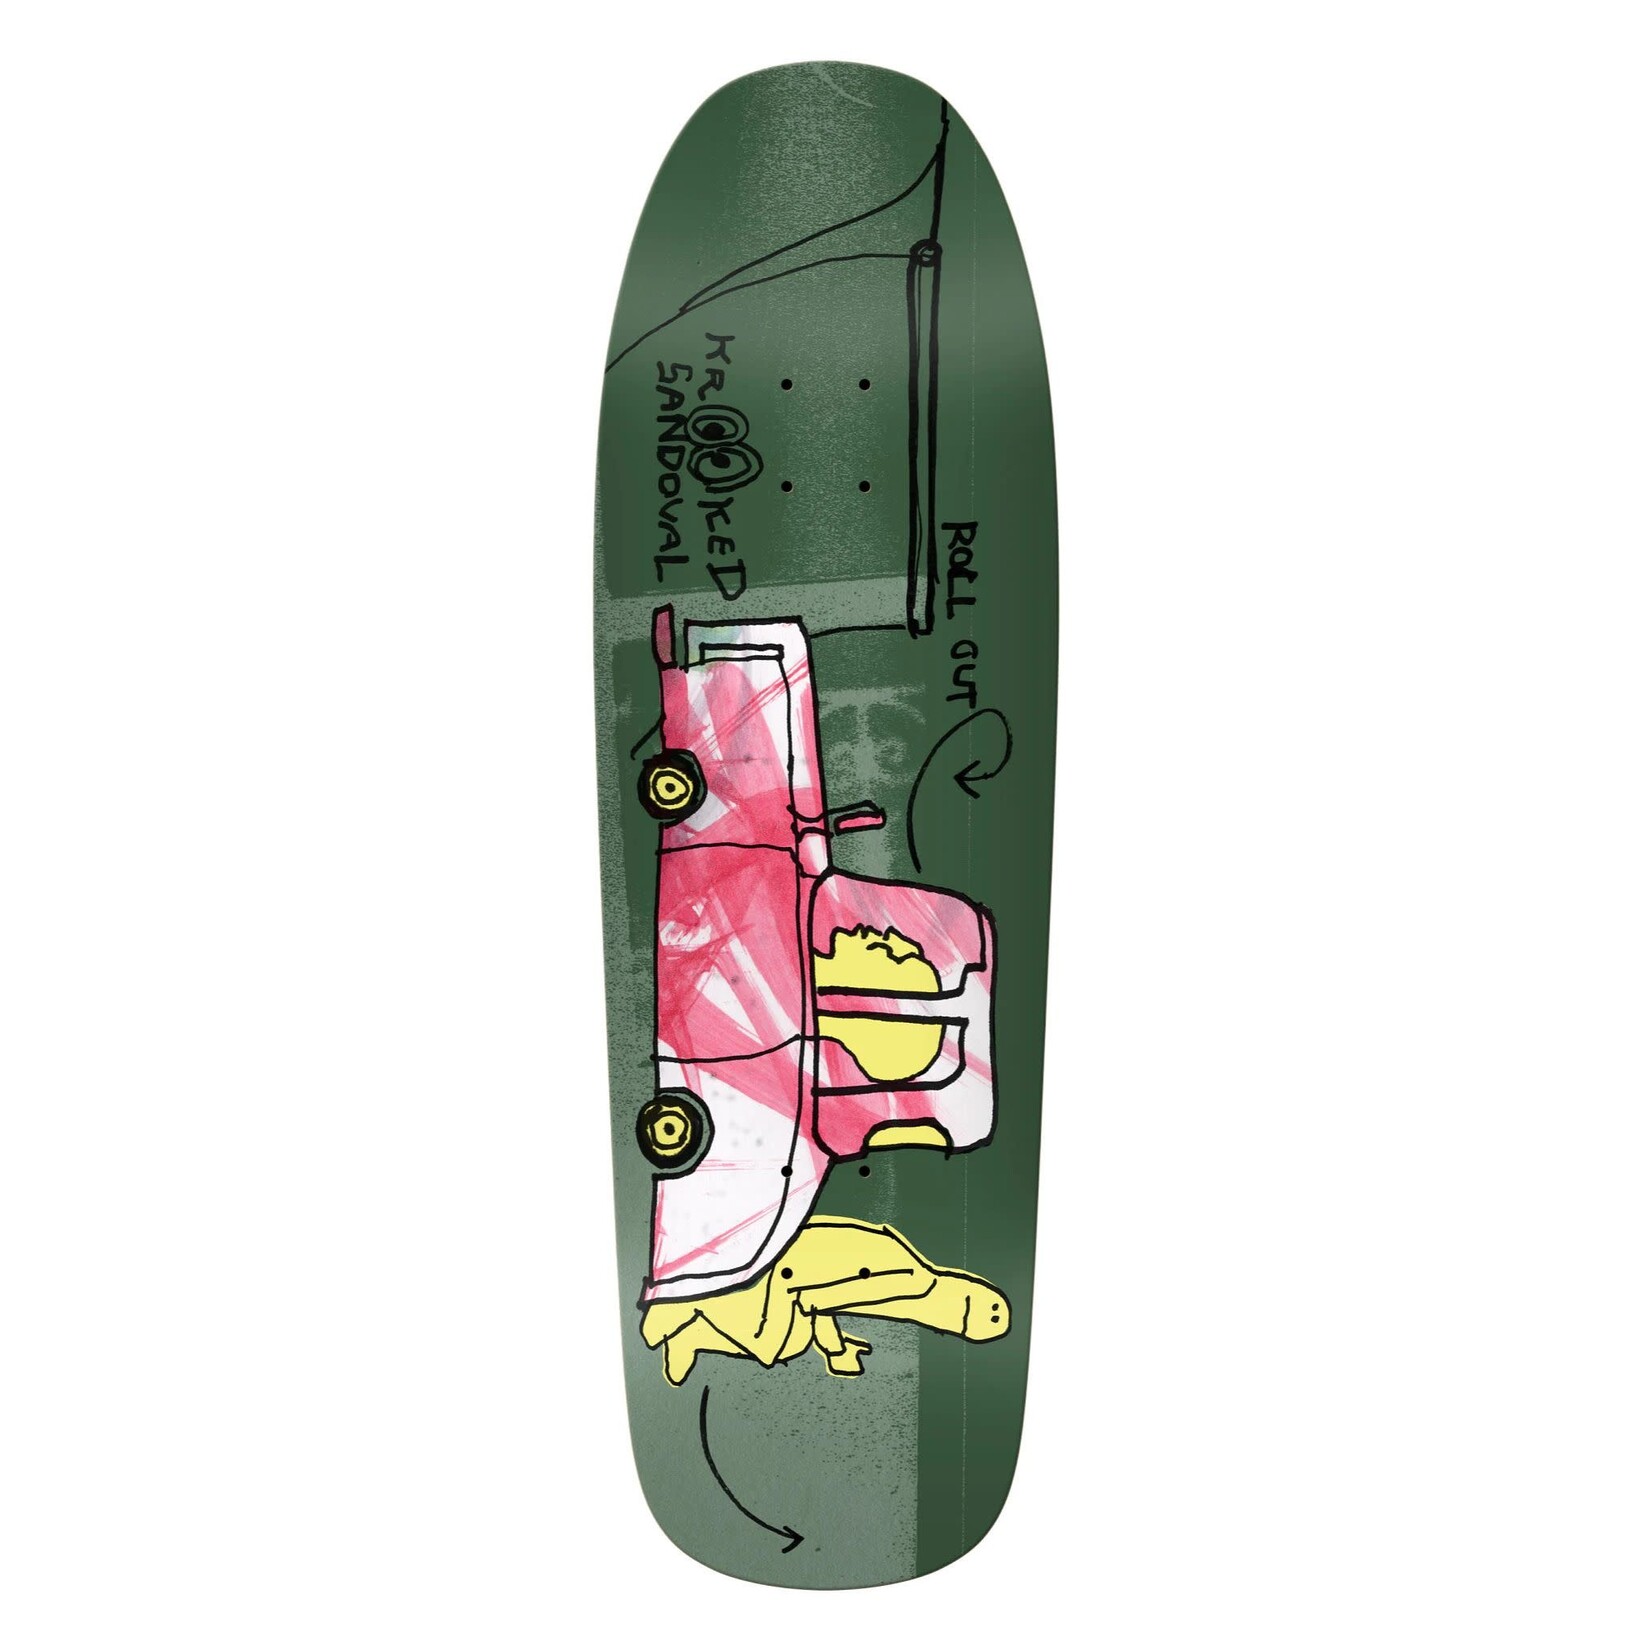 Krooked Krooked Sandoval Roll Out Deck - 9.81" x 32"